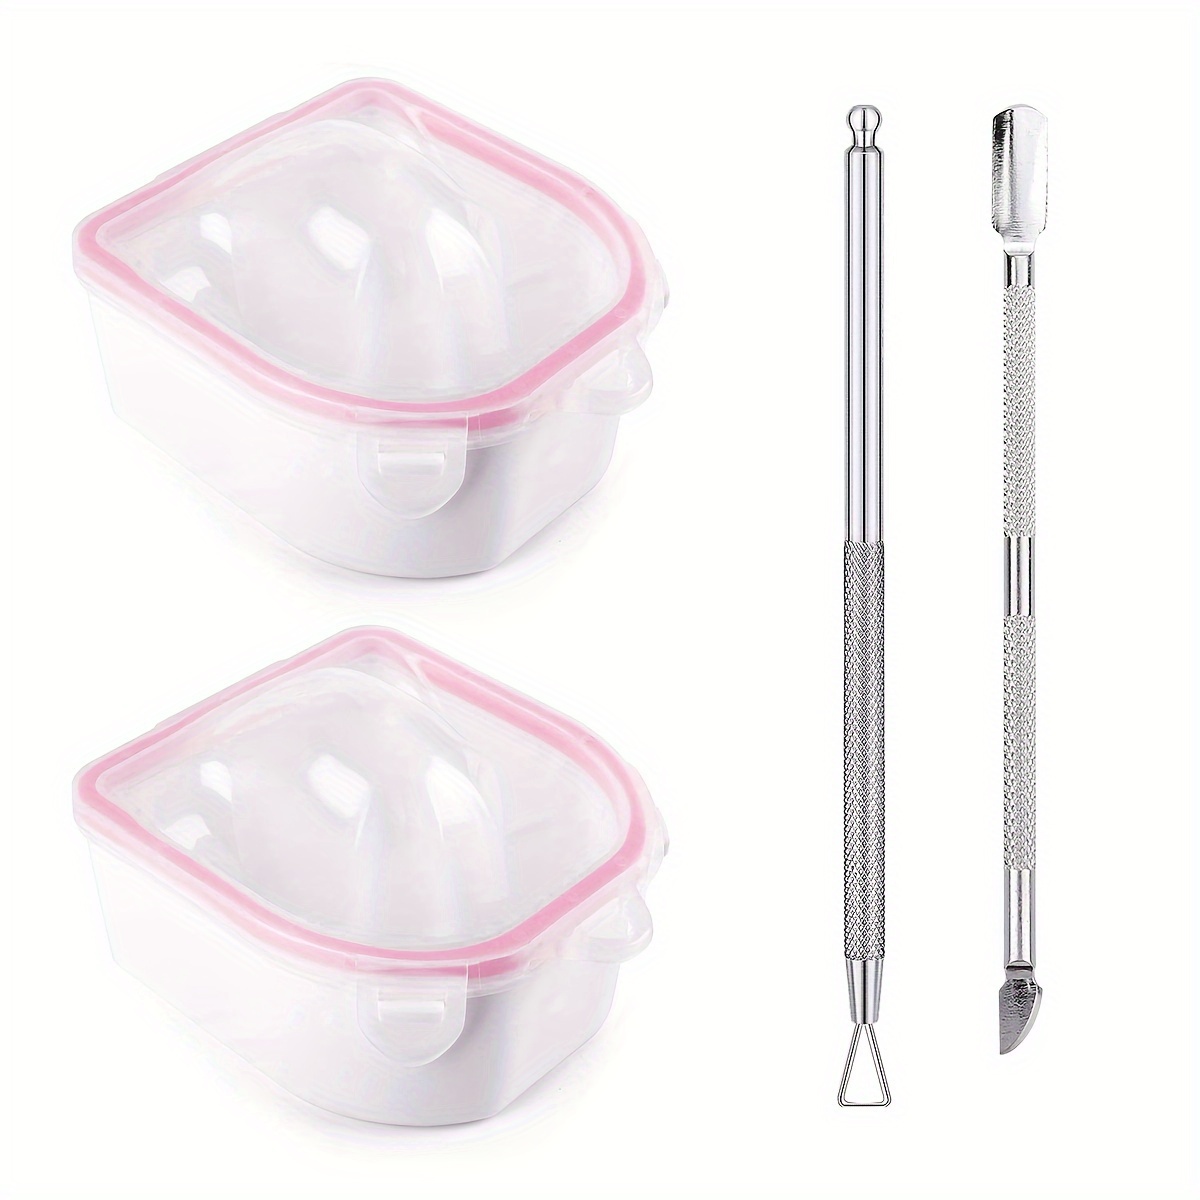 

Nail Soaking Bowl, 2pcs Soak Off Acrylic Nail Art Powder Gel Polish Remover Bowl With Triangle Cuticle Peeler And Stainless Steel Cuticle Pusher, Soaker Tray Manicure Set Spa Tool